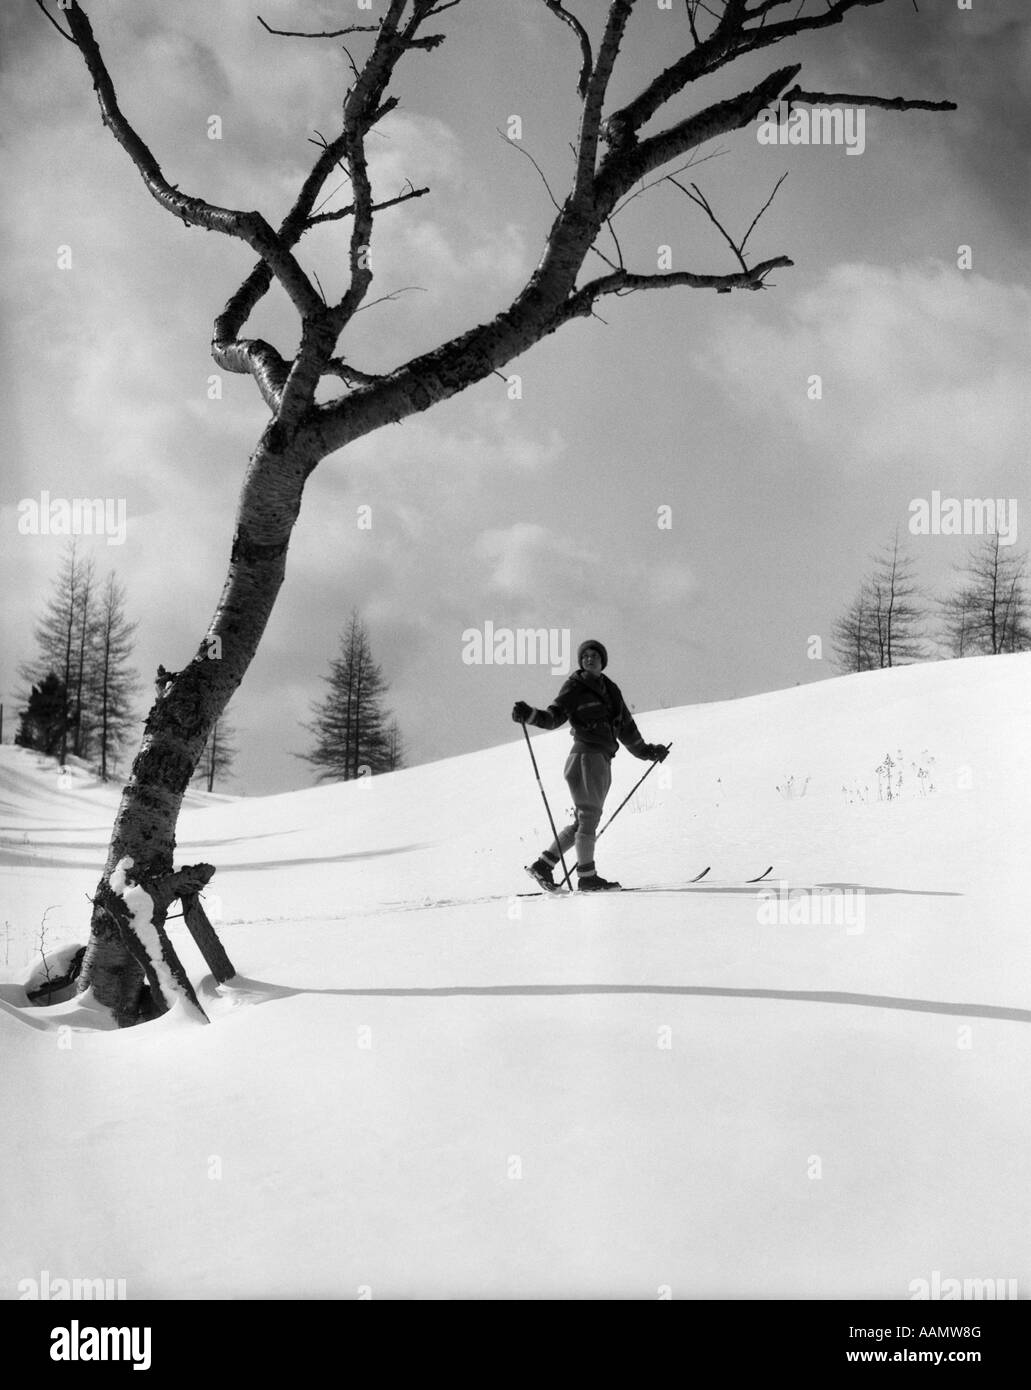 1920s 1930s SILHOUETTE OF WOMAN CROSS COUNTRY SKIER NEAR OLD TREE Stock Photo